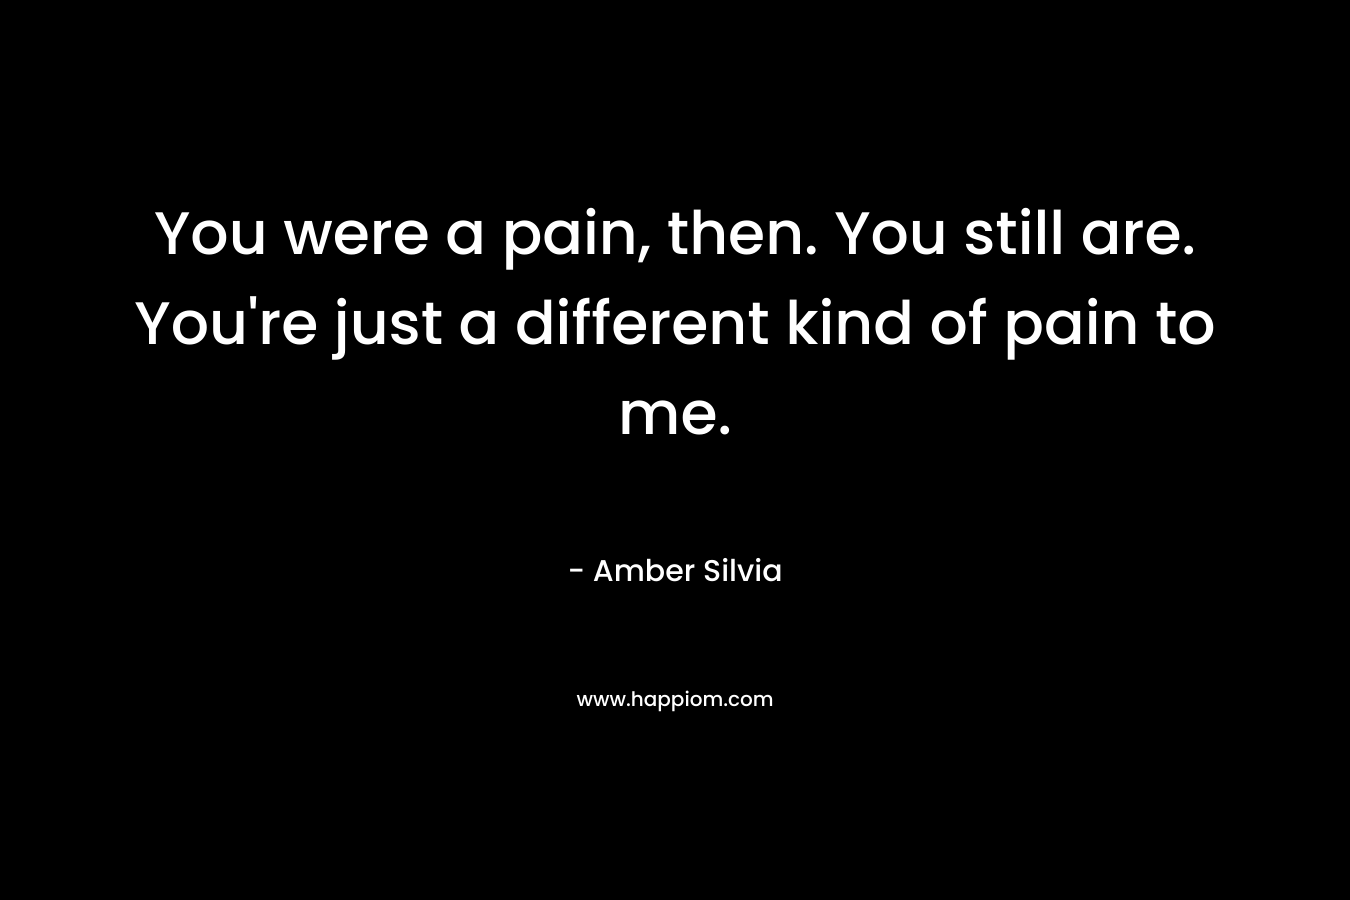 You were a pain, then. You still are. You're just a different kind of pain to me.